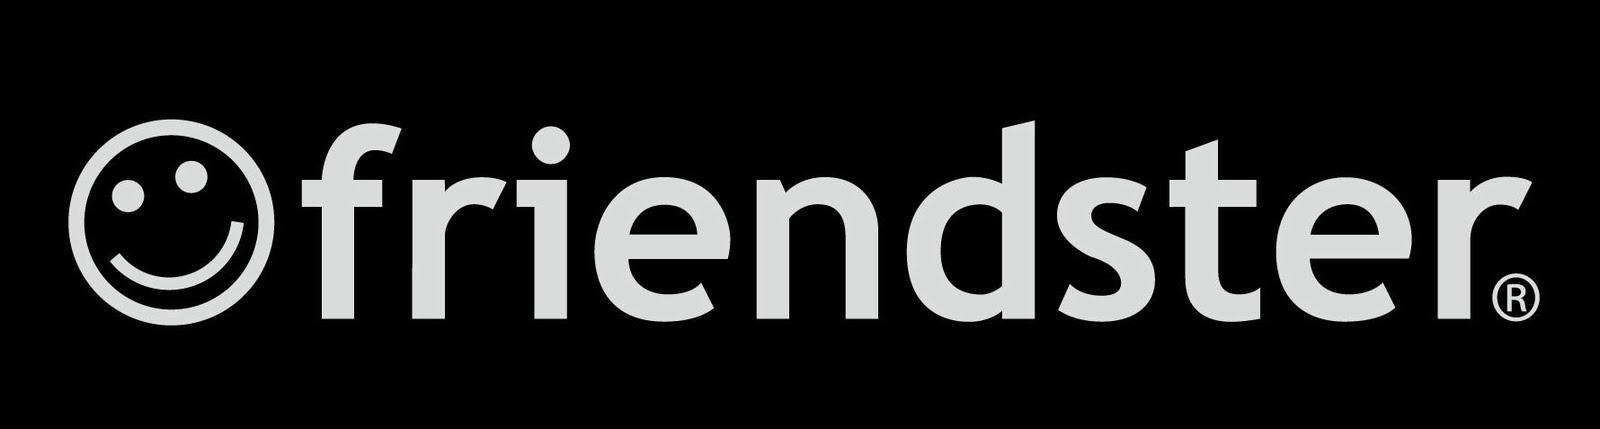 Old Friendster Logo - 11 social networks that hit the skids, and here's why - Memeburn